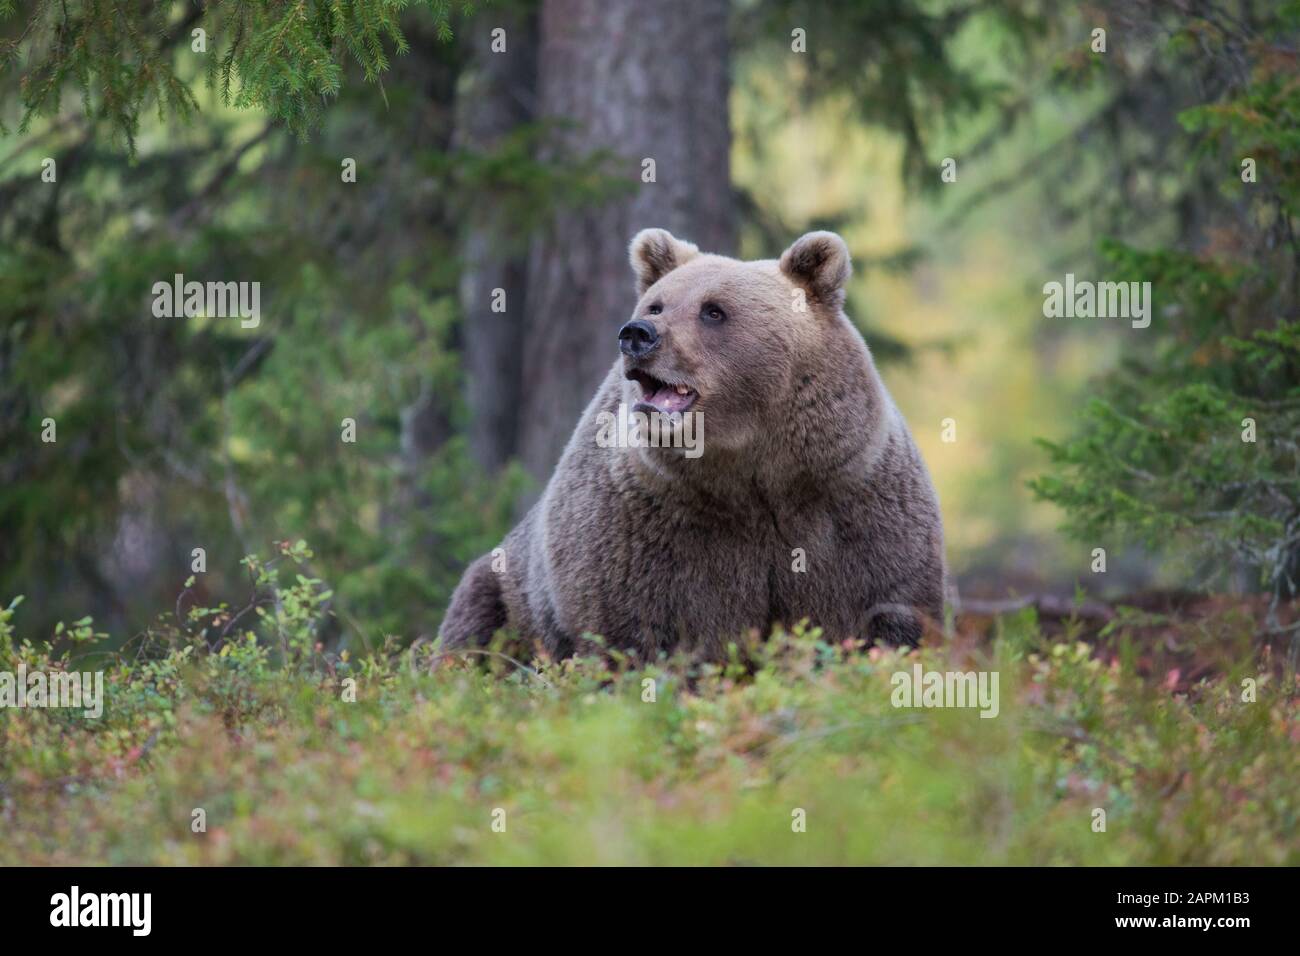 Brown bear in autumnal forest, Kuhmo, Finland Stock Photo